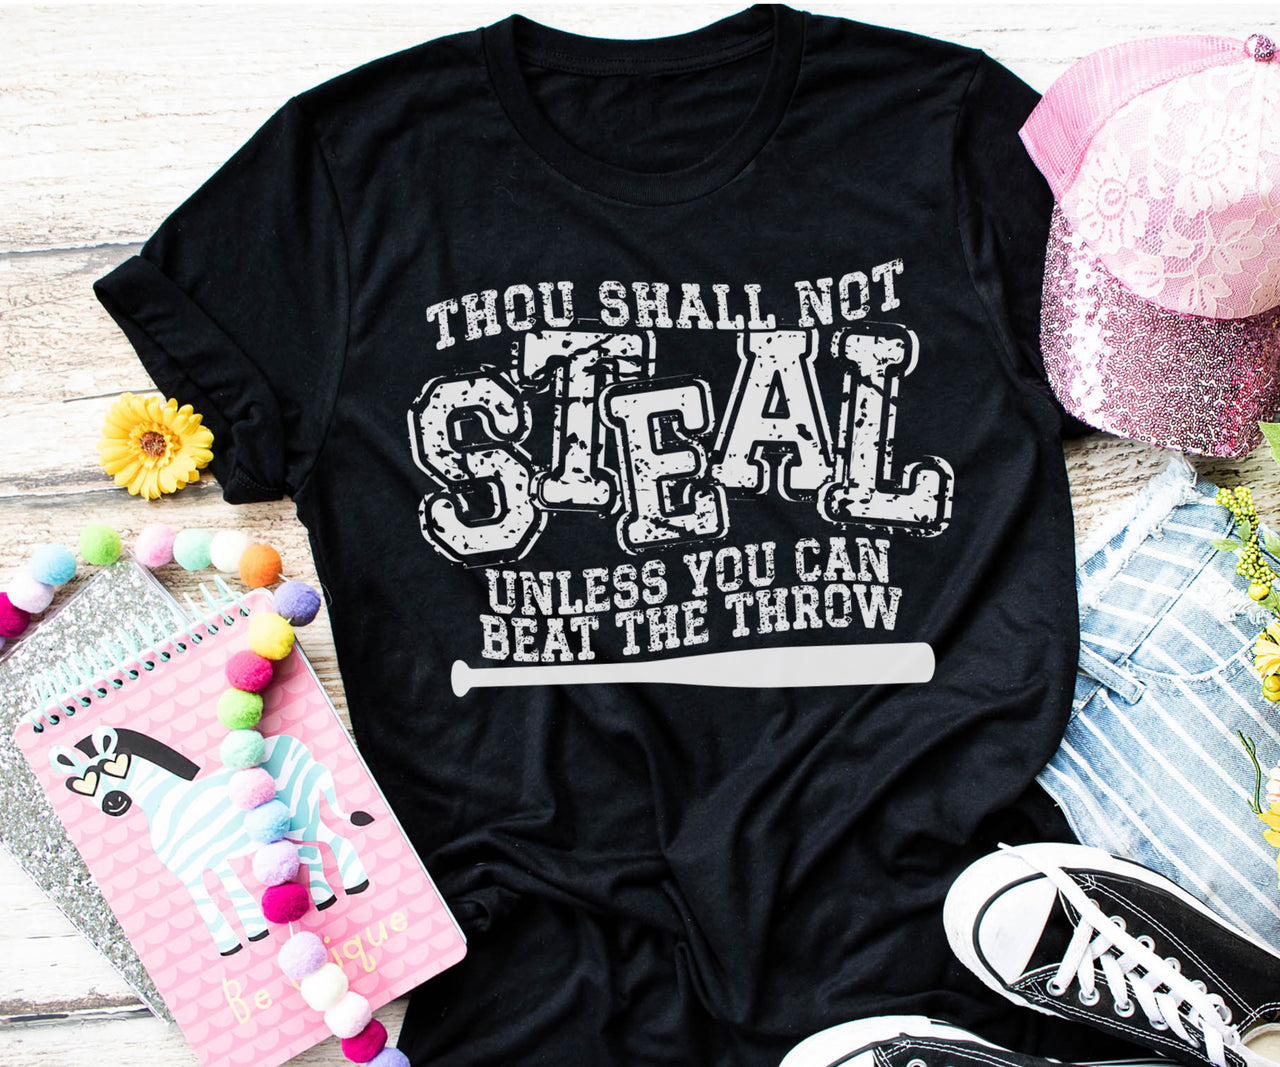 Adult - Unisex Tee (Thou shall not Steal)